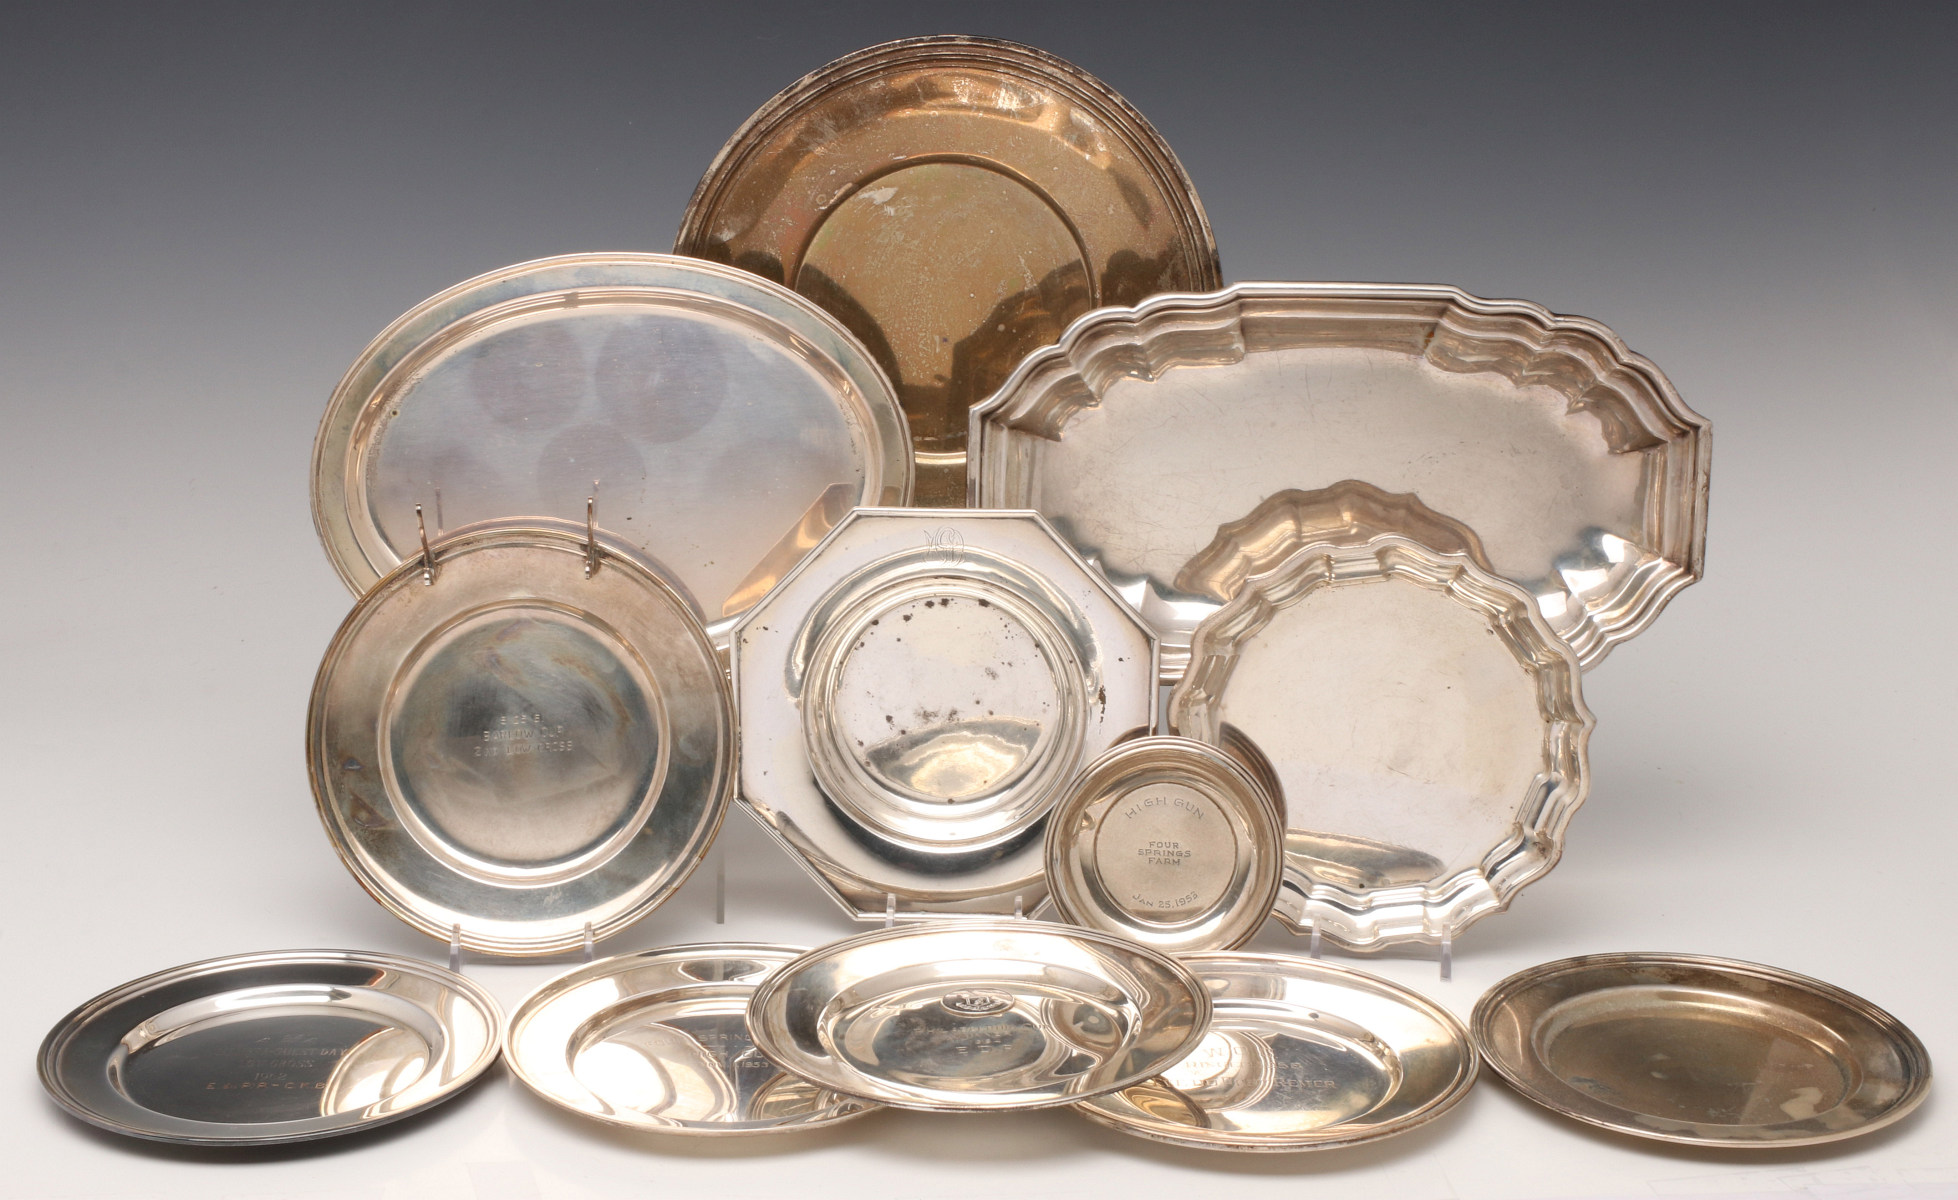 A LARGE GROUP OF STERLING HOLLOWWARE TRAYS AND PLATES